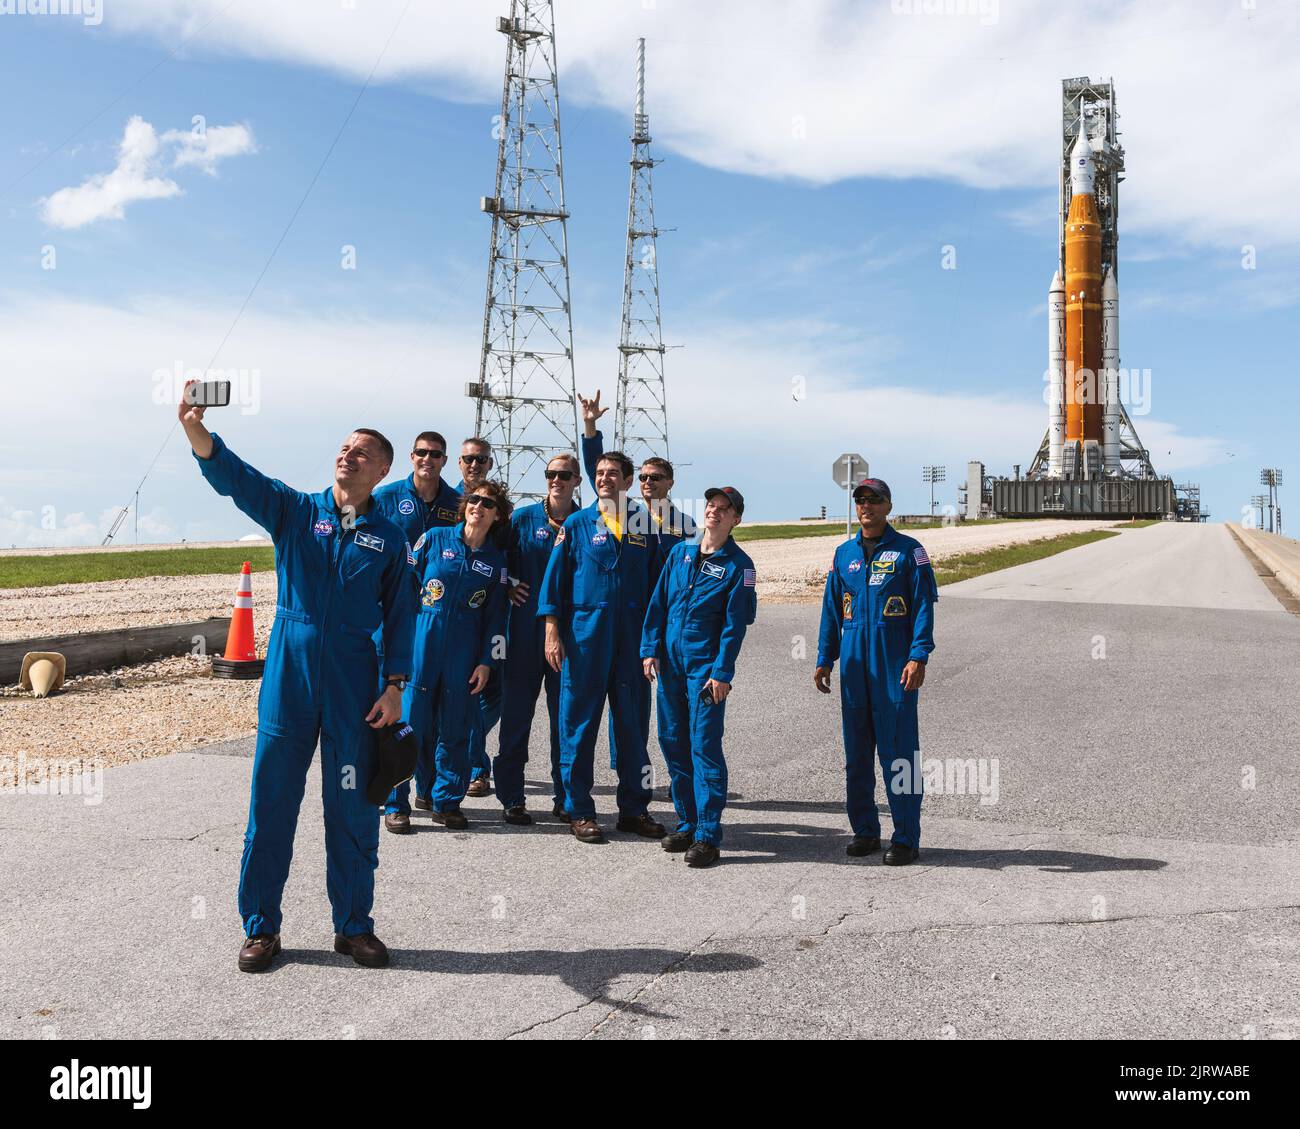 Cape Canaveral, United States of America. 22 August, 2022. NASA astronauts and astronaut candidates pose for a selfie in front of the Space Launch System Artemis rocket at the Kennedy Space Center August 23, 2022 in Cape Canaveral, Florida. NASA Astronauts Reid Wiseman, Christina Koch, Drew Morgan , Zena Cardman, Joe Acaba, NASA Astronaut Candidates Nicole Ayers, Jack Hathaway, Canadian Space Agency Astronaut Jeremy Hansen, and NASA Pilot Chris Condon. Credit: Josh Valcarcel/NASA/Alamy Live News Stock Photo